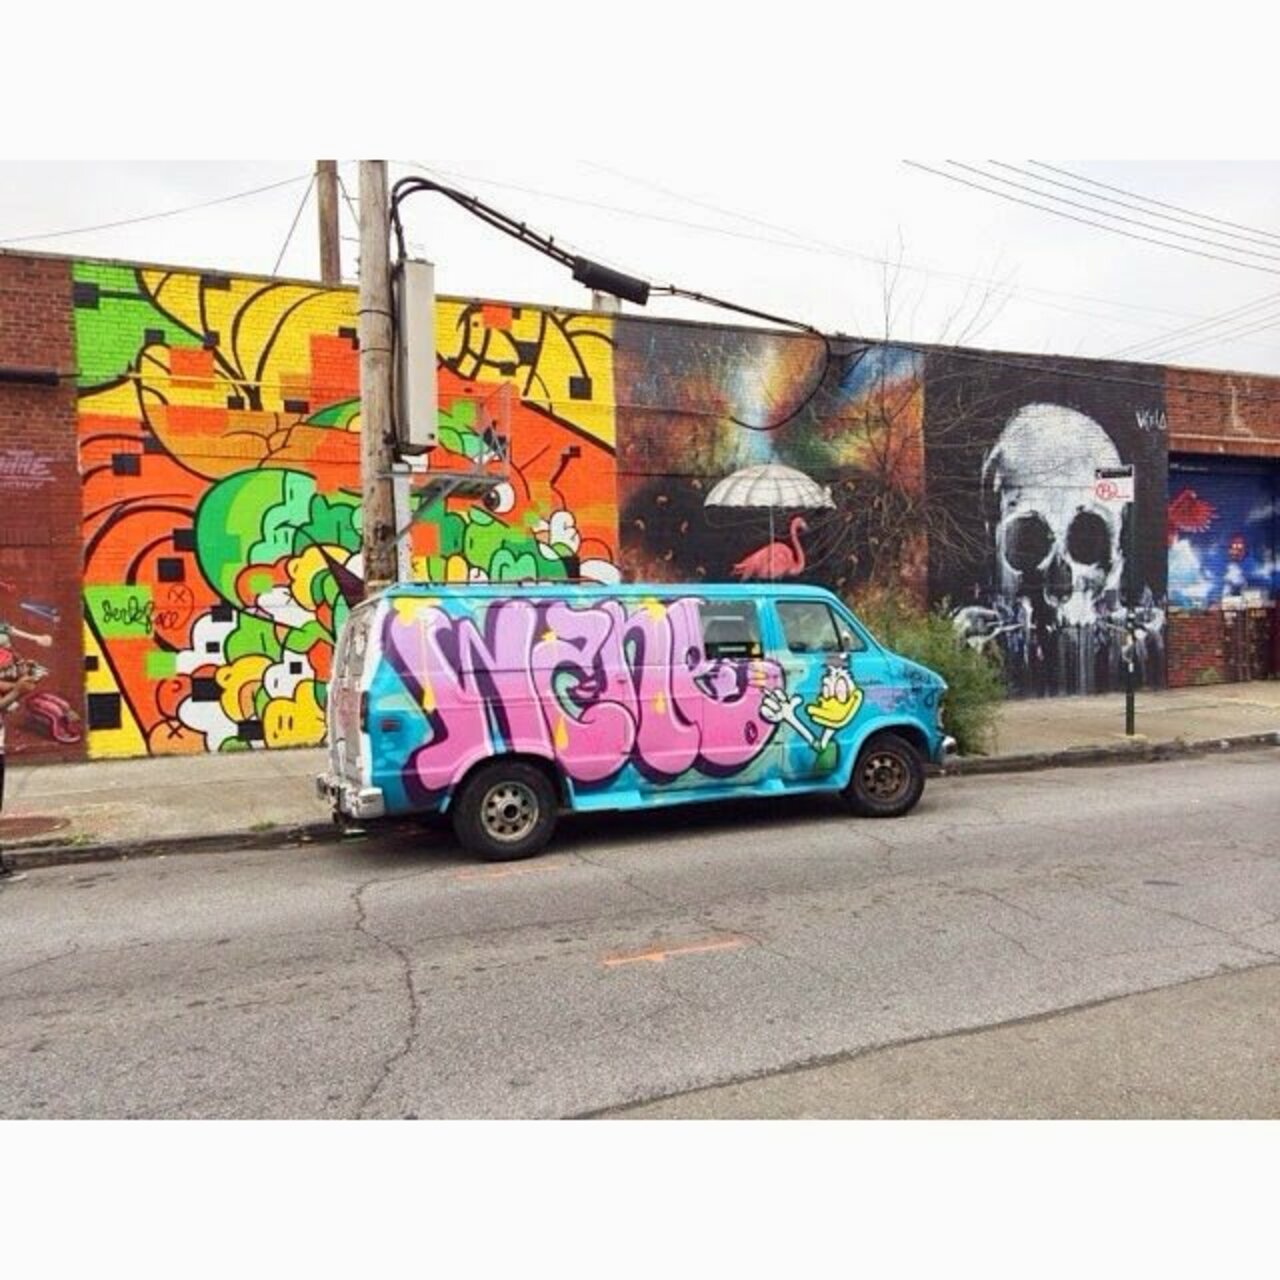 I saw this van in #brooklyn . Does anyone know of the #artist ? #streetart #graffiti https://t.co/9pBRlmhXCm